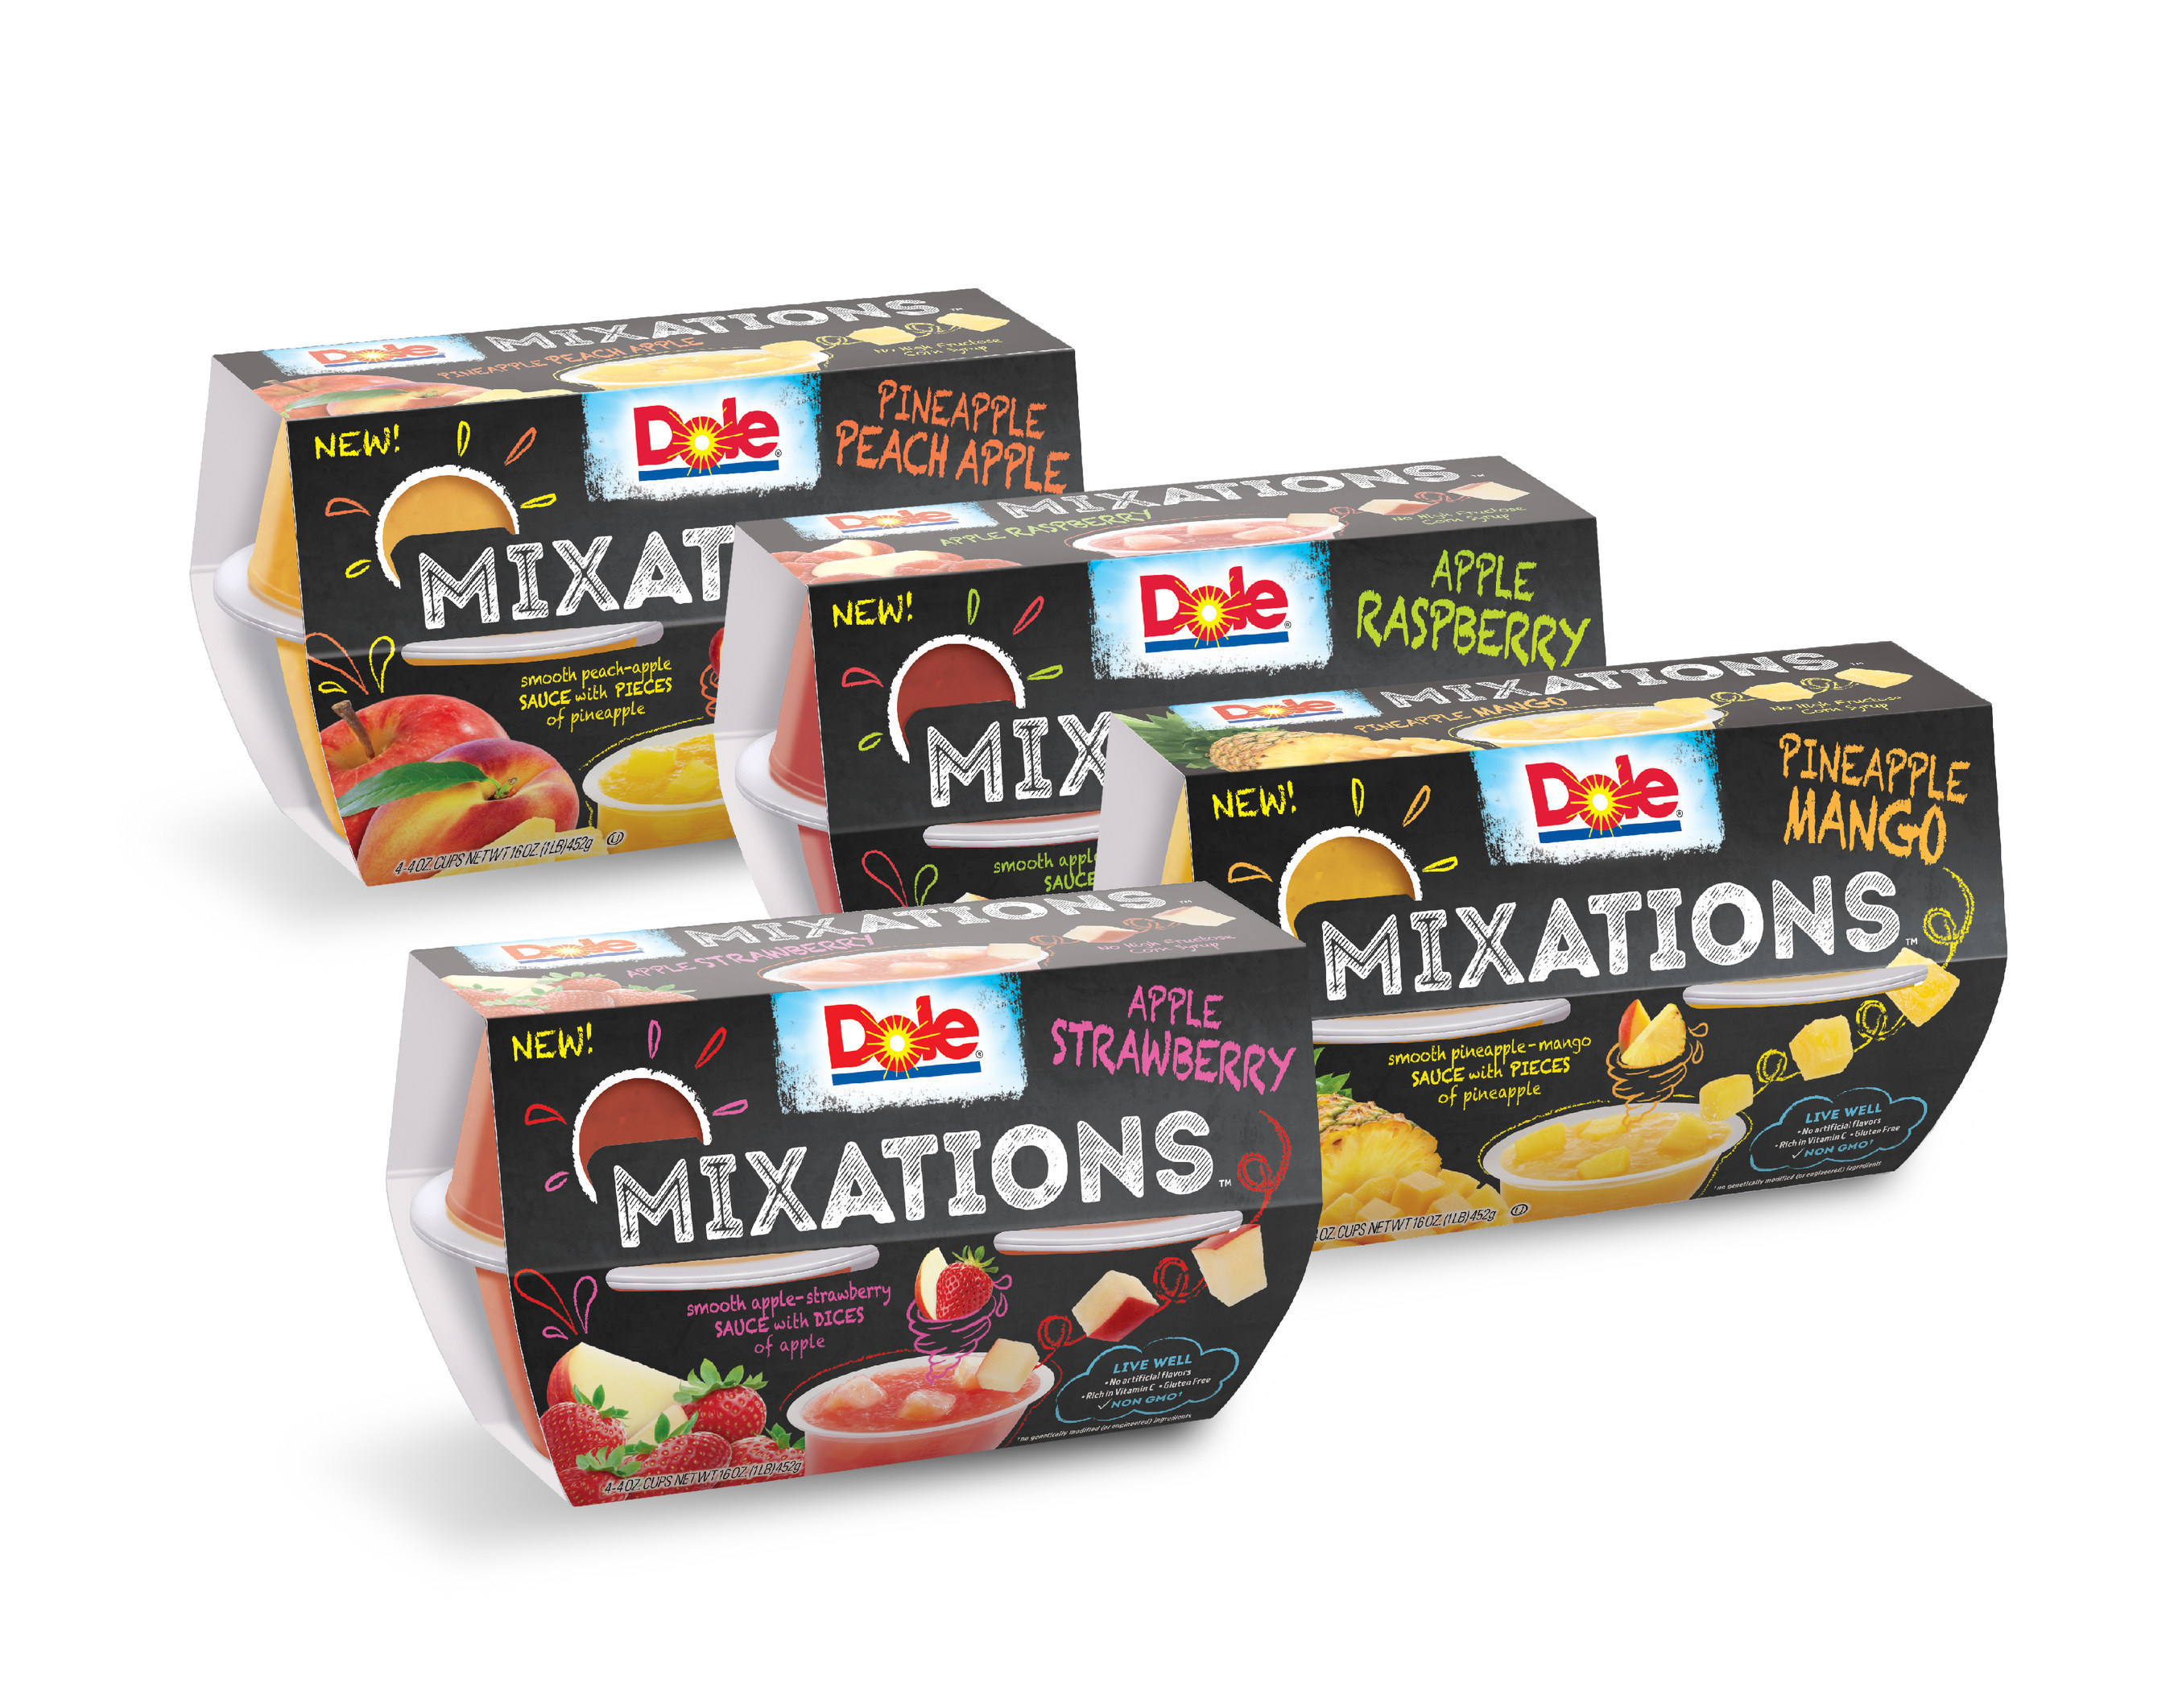 DOLE stirs up a new world of possibilities with Mixations one-of-a-kind fruit fusions. Inventive pairings of smooth fruit sauces and juicy chunks of real fruit perfect for any mealtime or snacking occasion. www.DoleMixations.com